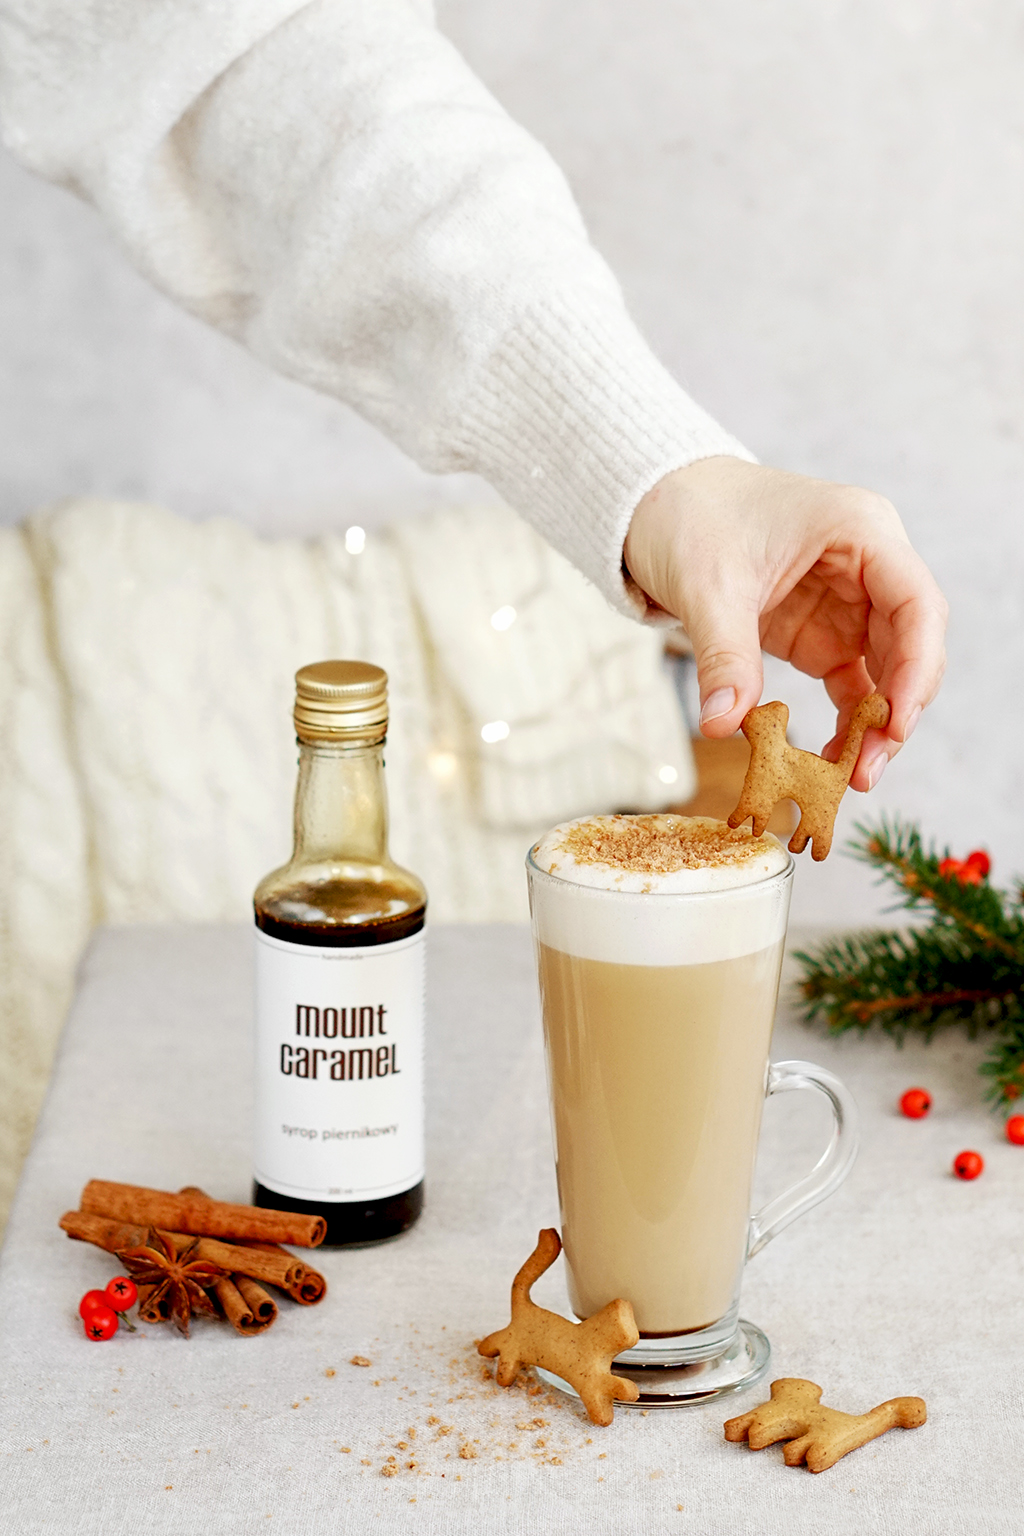 How to make gingerbread coffee?